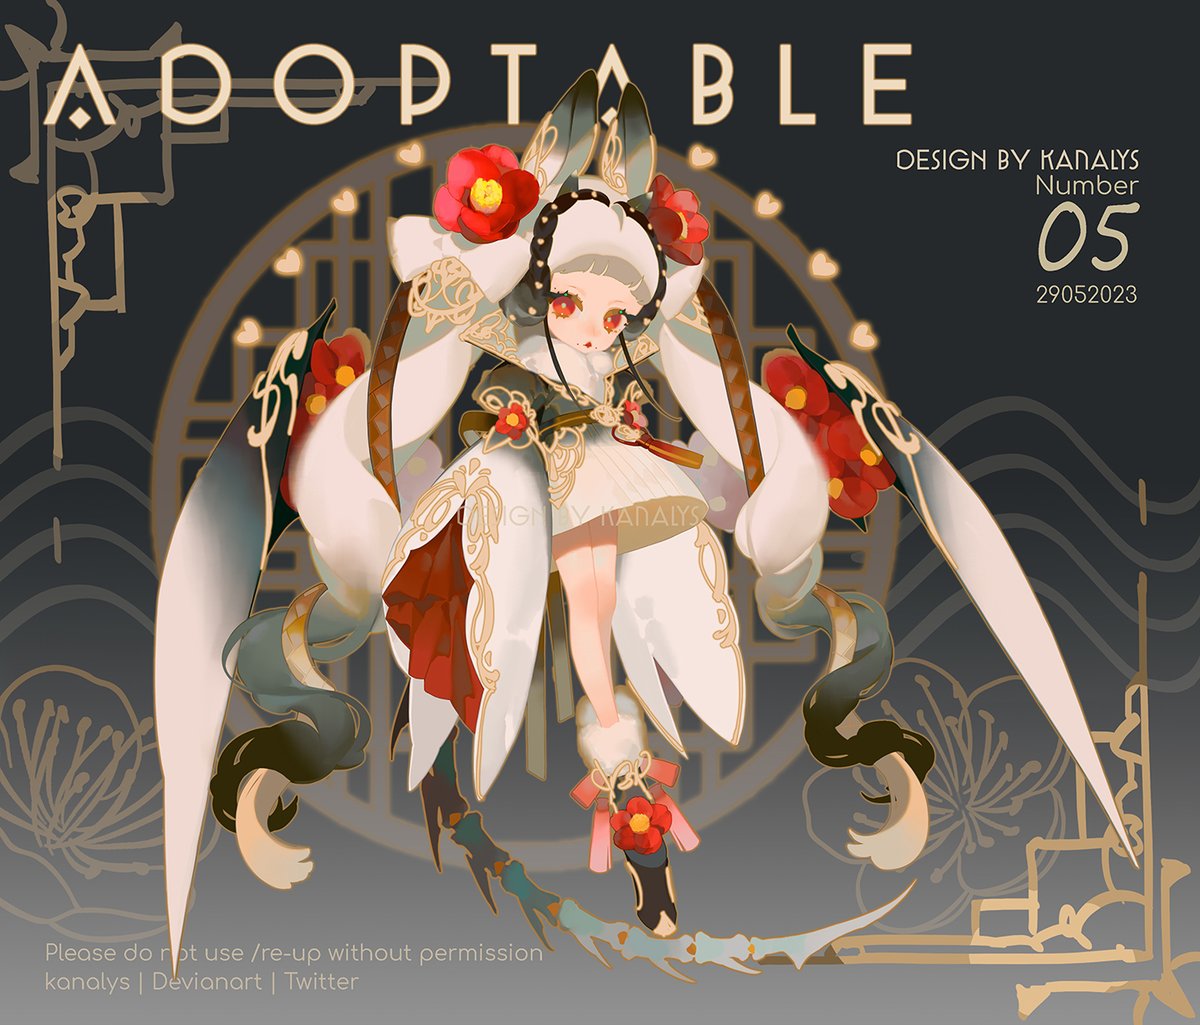 Adoptable no.05
The auction is still going on.